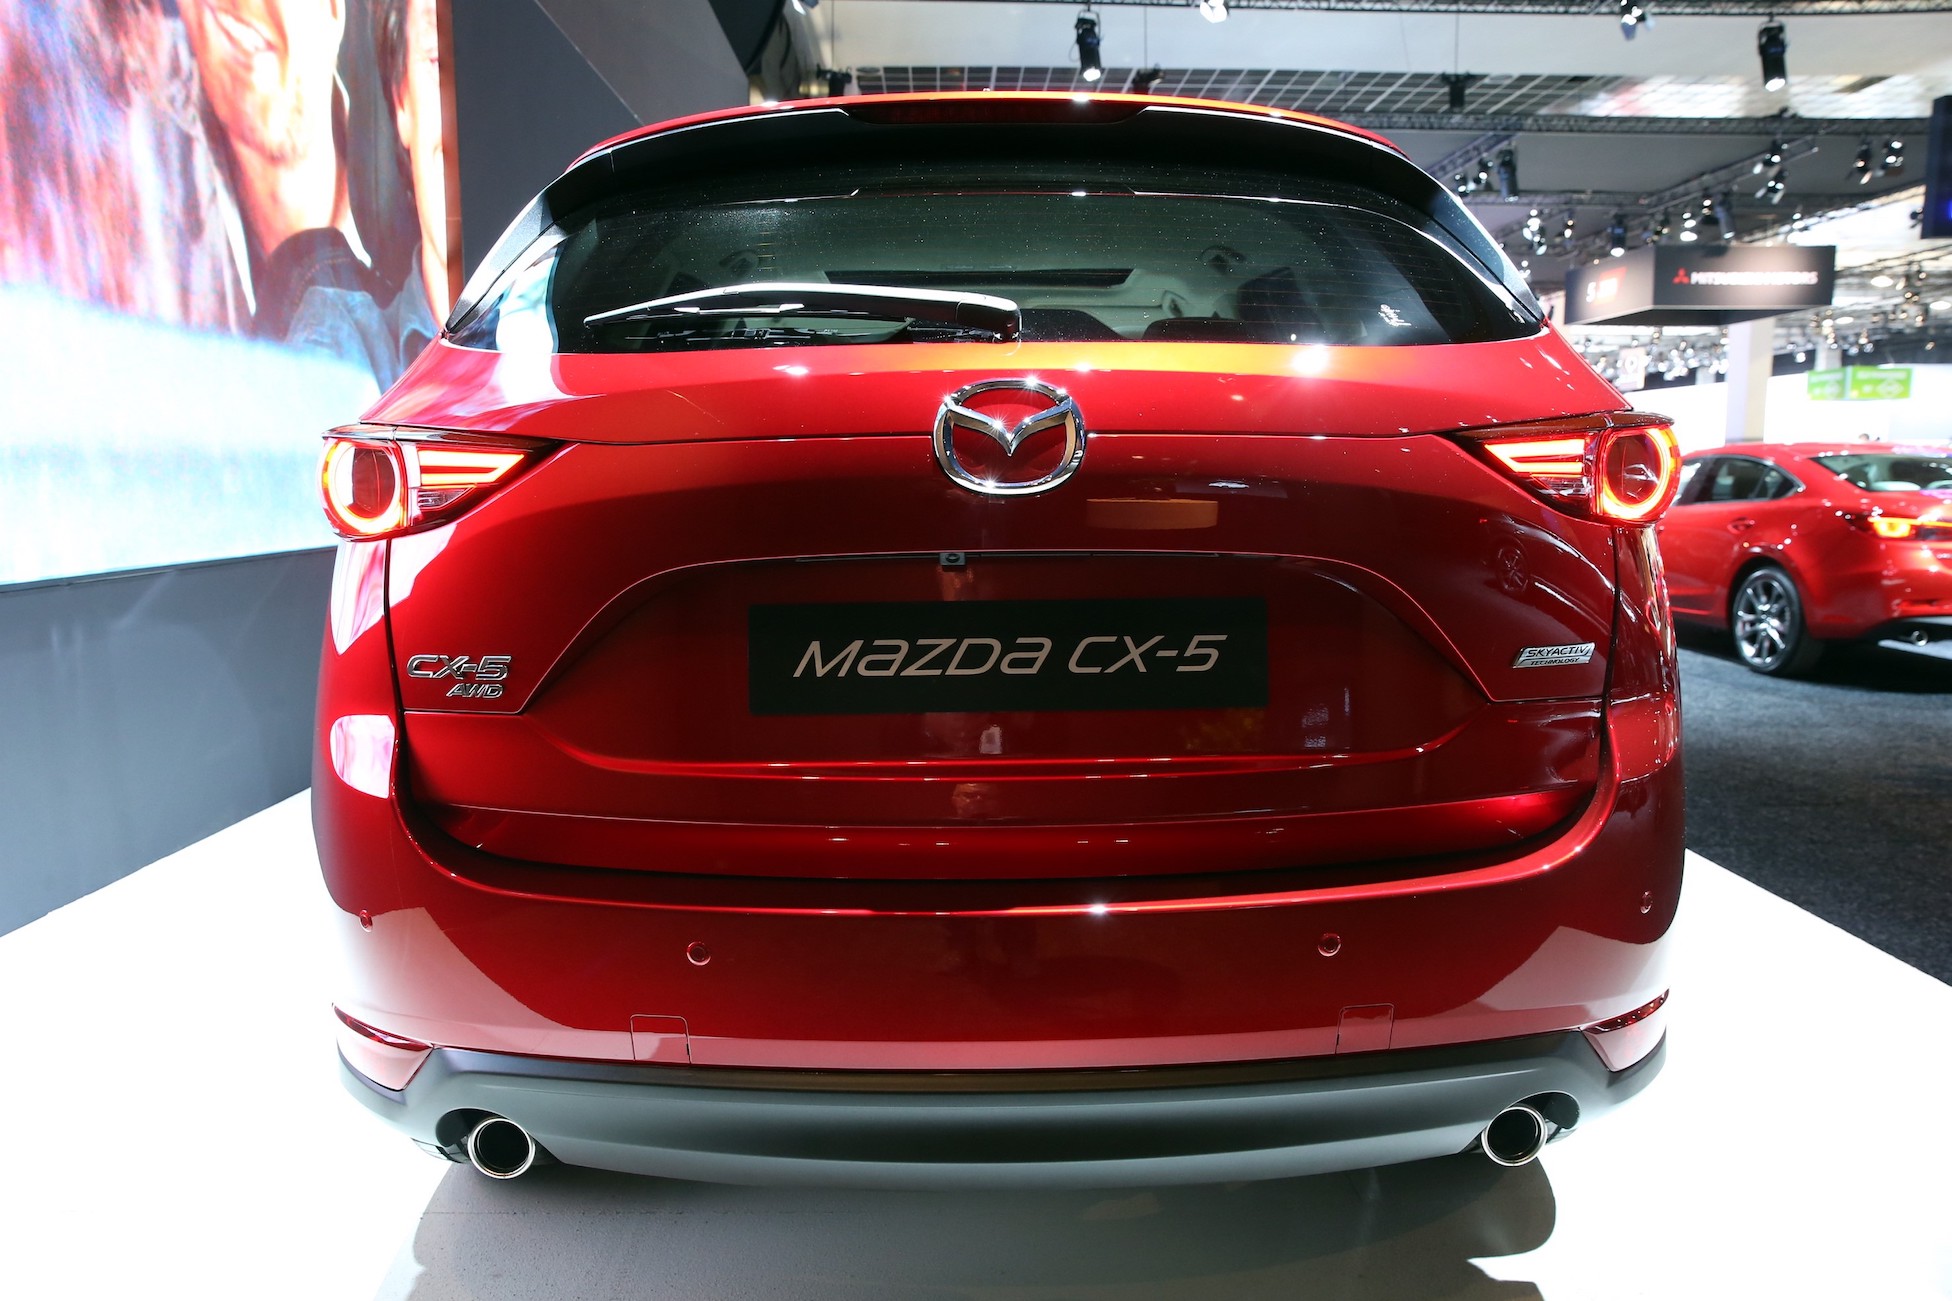 A Mazda CX-5, older sibling is displayed during the 96th Brussels Motor Show at Brussels Expo Center